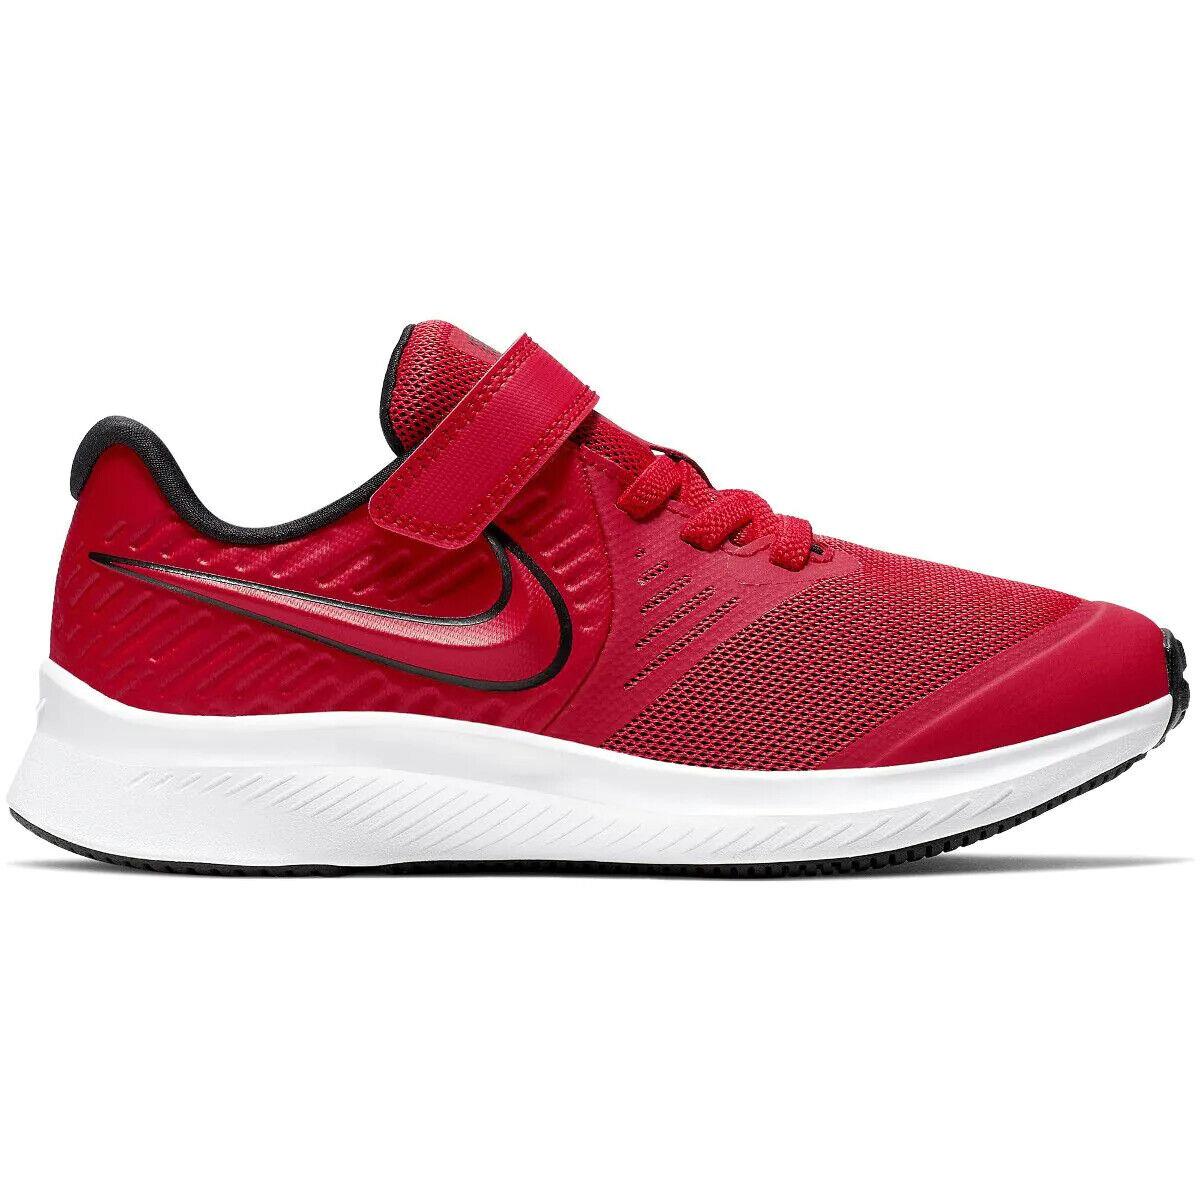 Nike Star Runner 2 AT1801-600 Unisex Red White Athletic Running Shoes HS2596 1Y